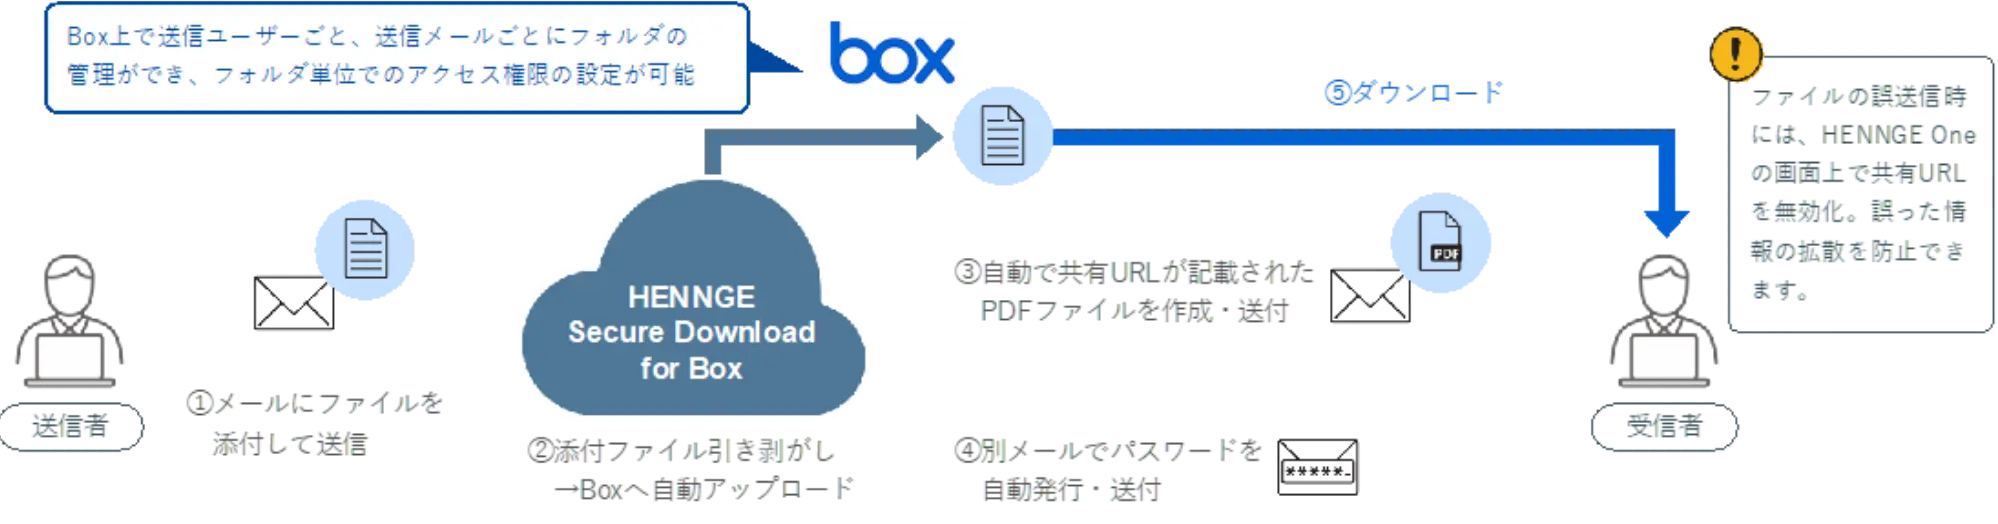 HENNGE Secure Download for Box概要